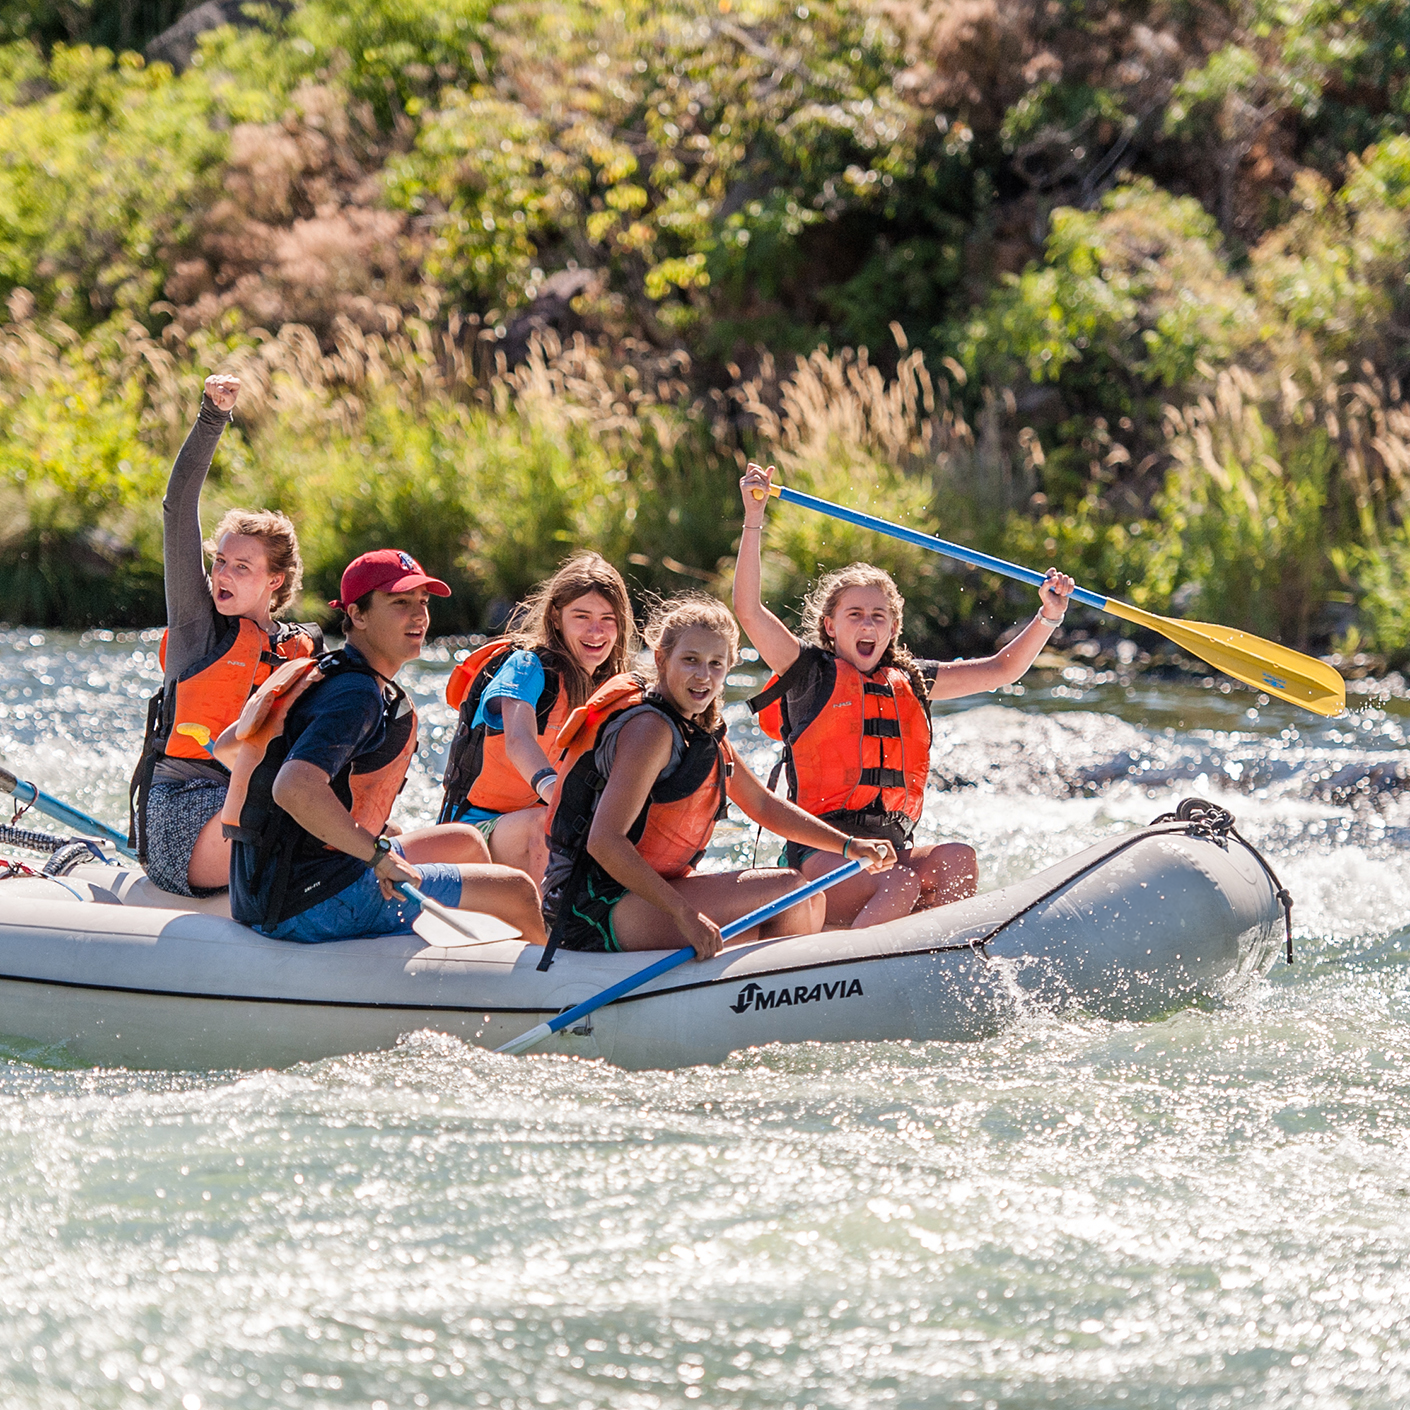 Group of campers on an inflatable raft floating down the river with excited looks on their faces.